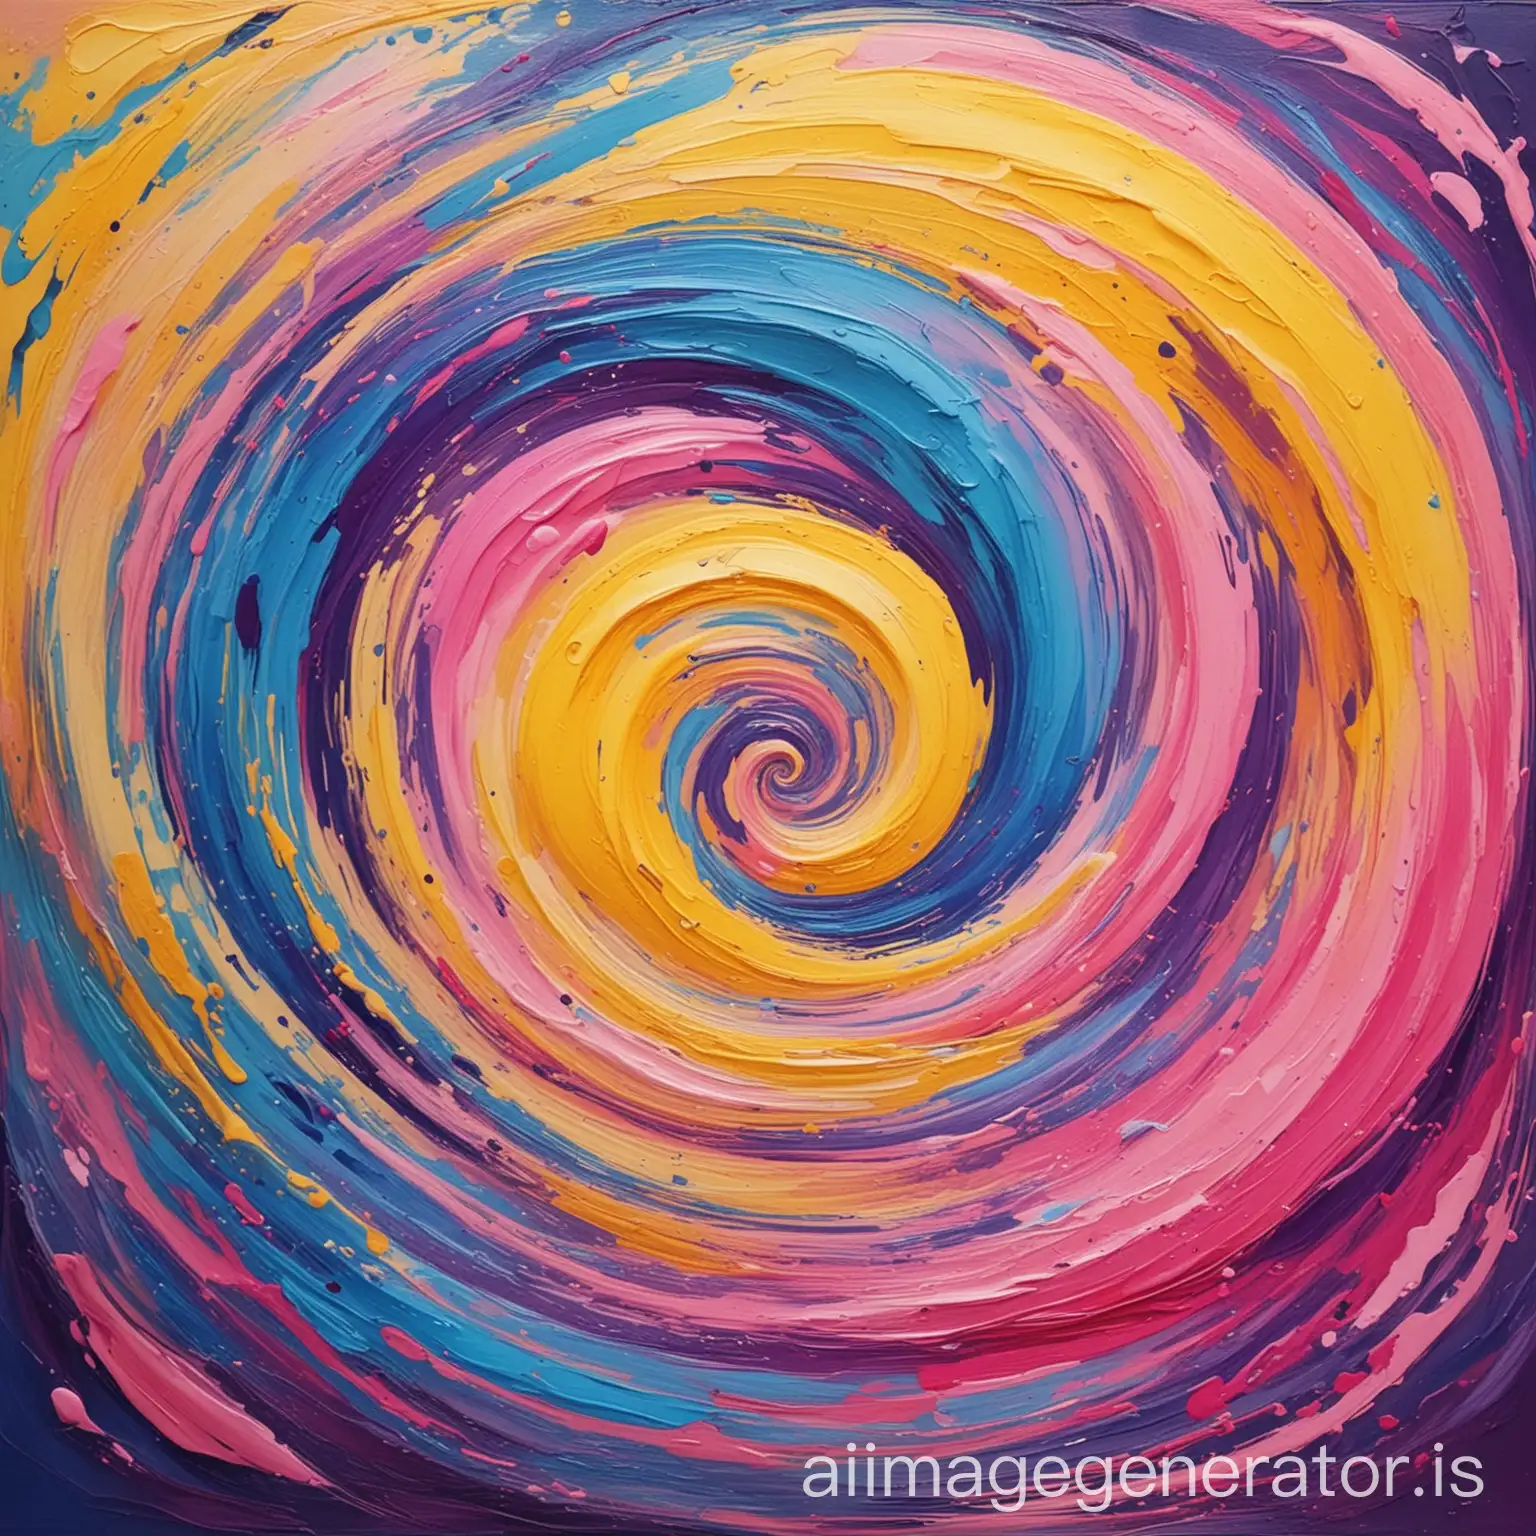 create abstract art swirl yellow blue pink violet